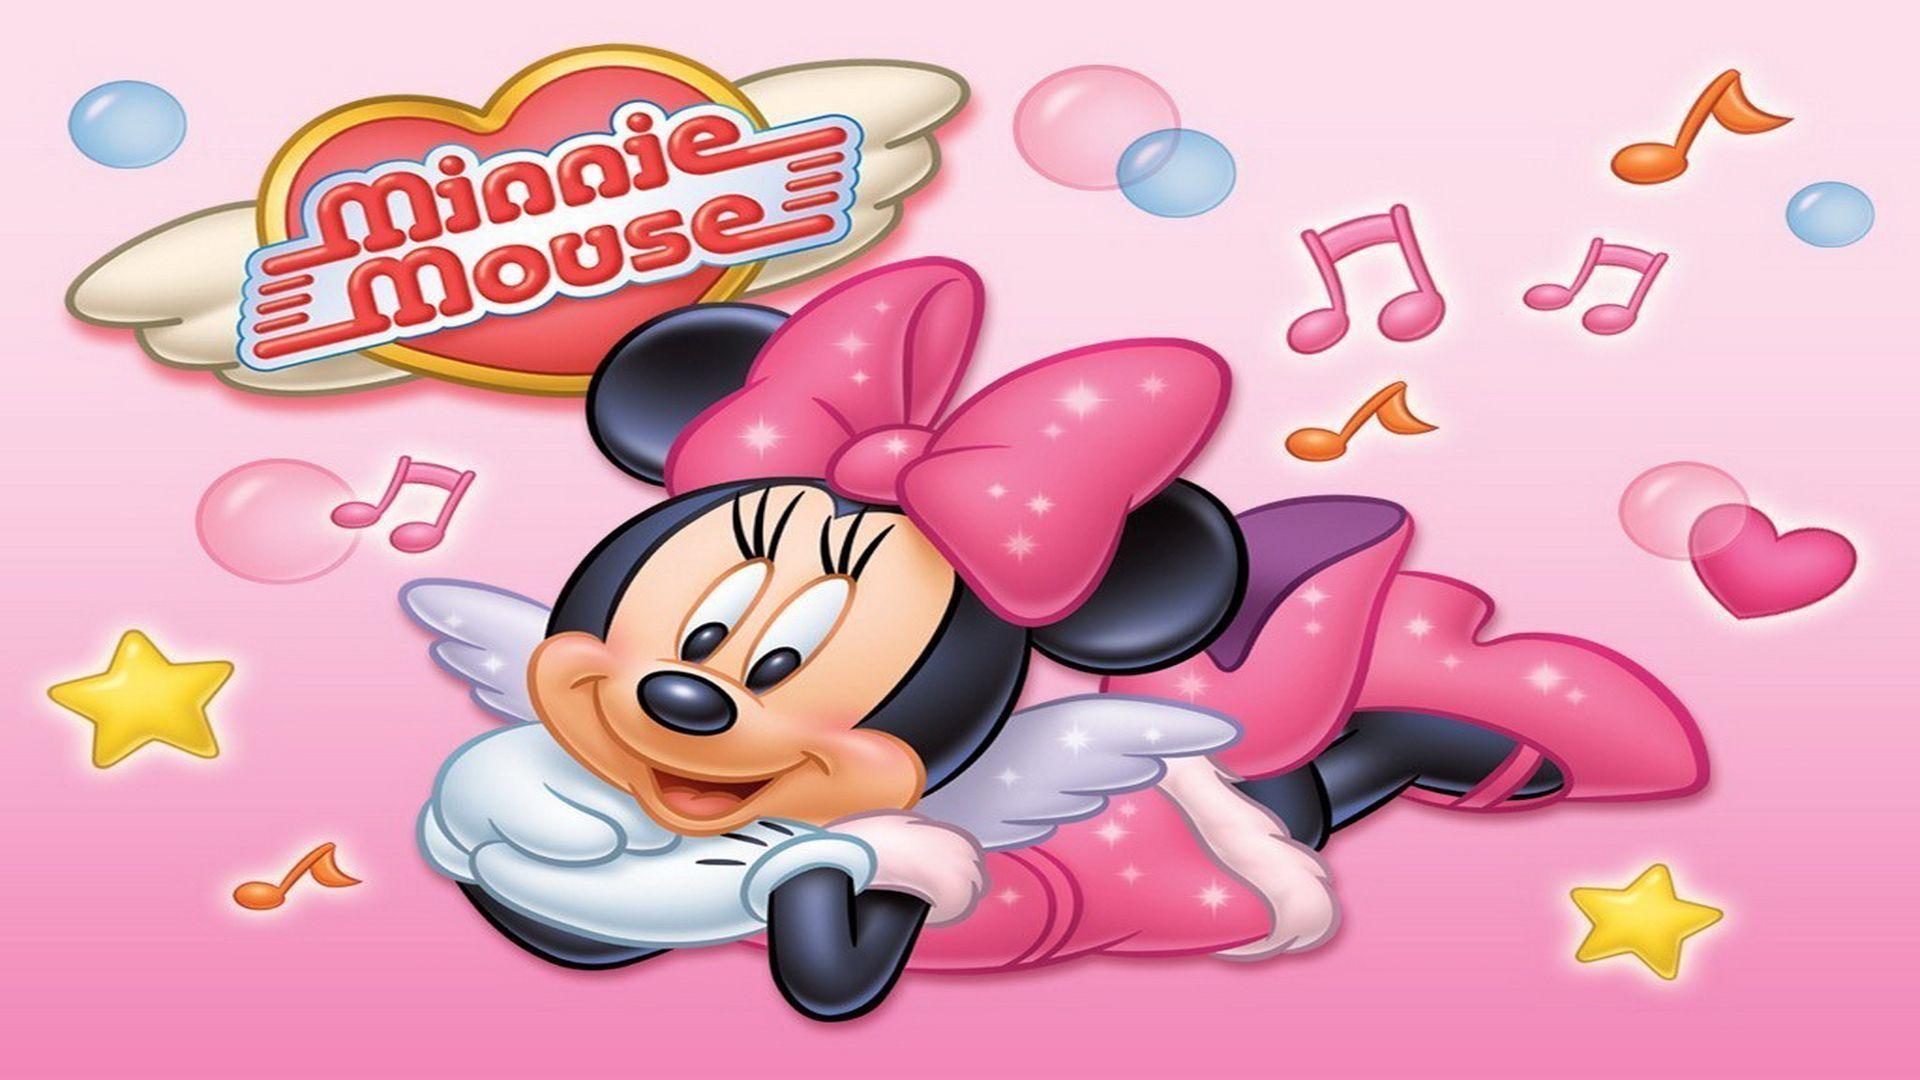 Minnie Mouse Image Disney Hd Cool 7 HD Wallpapers